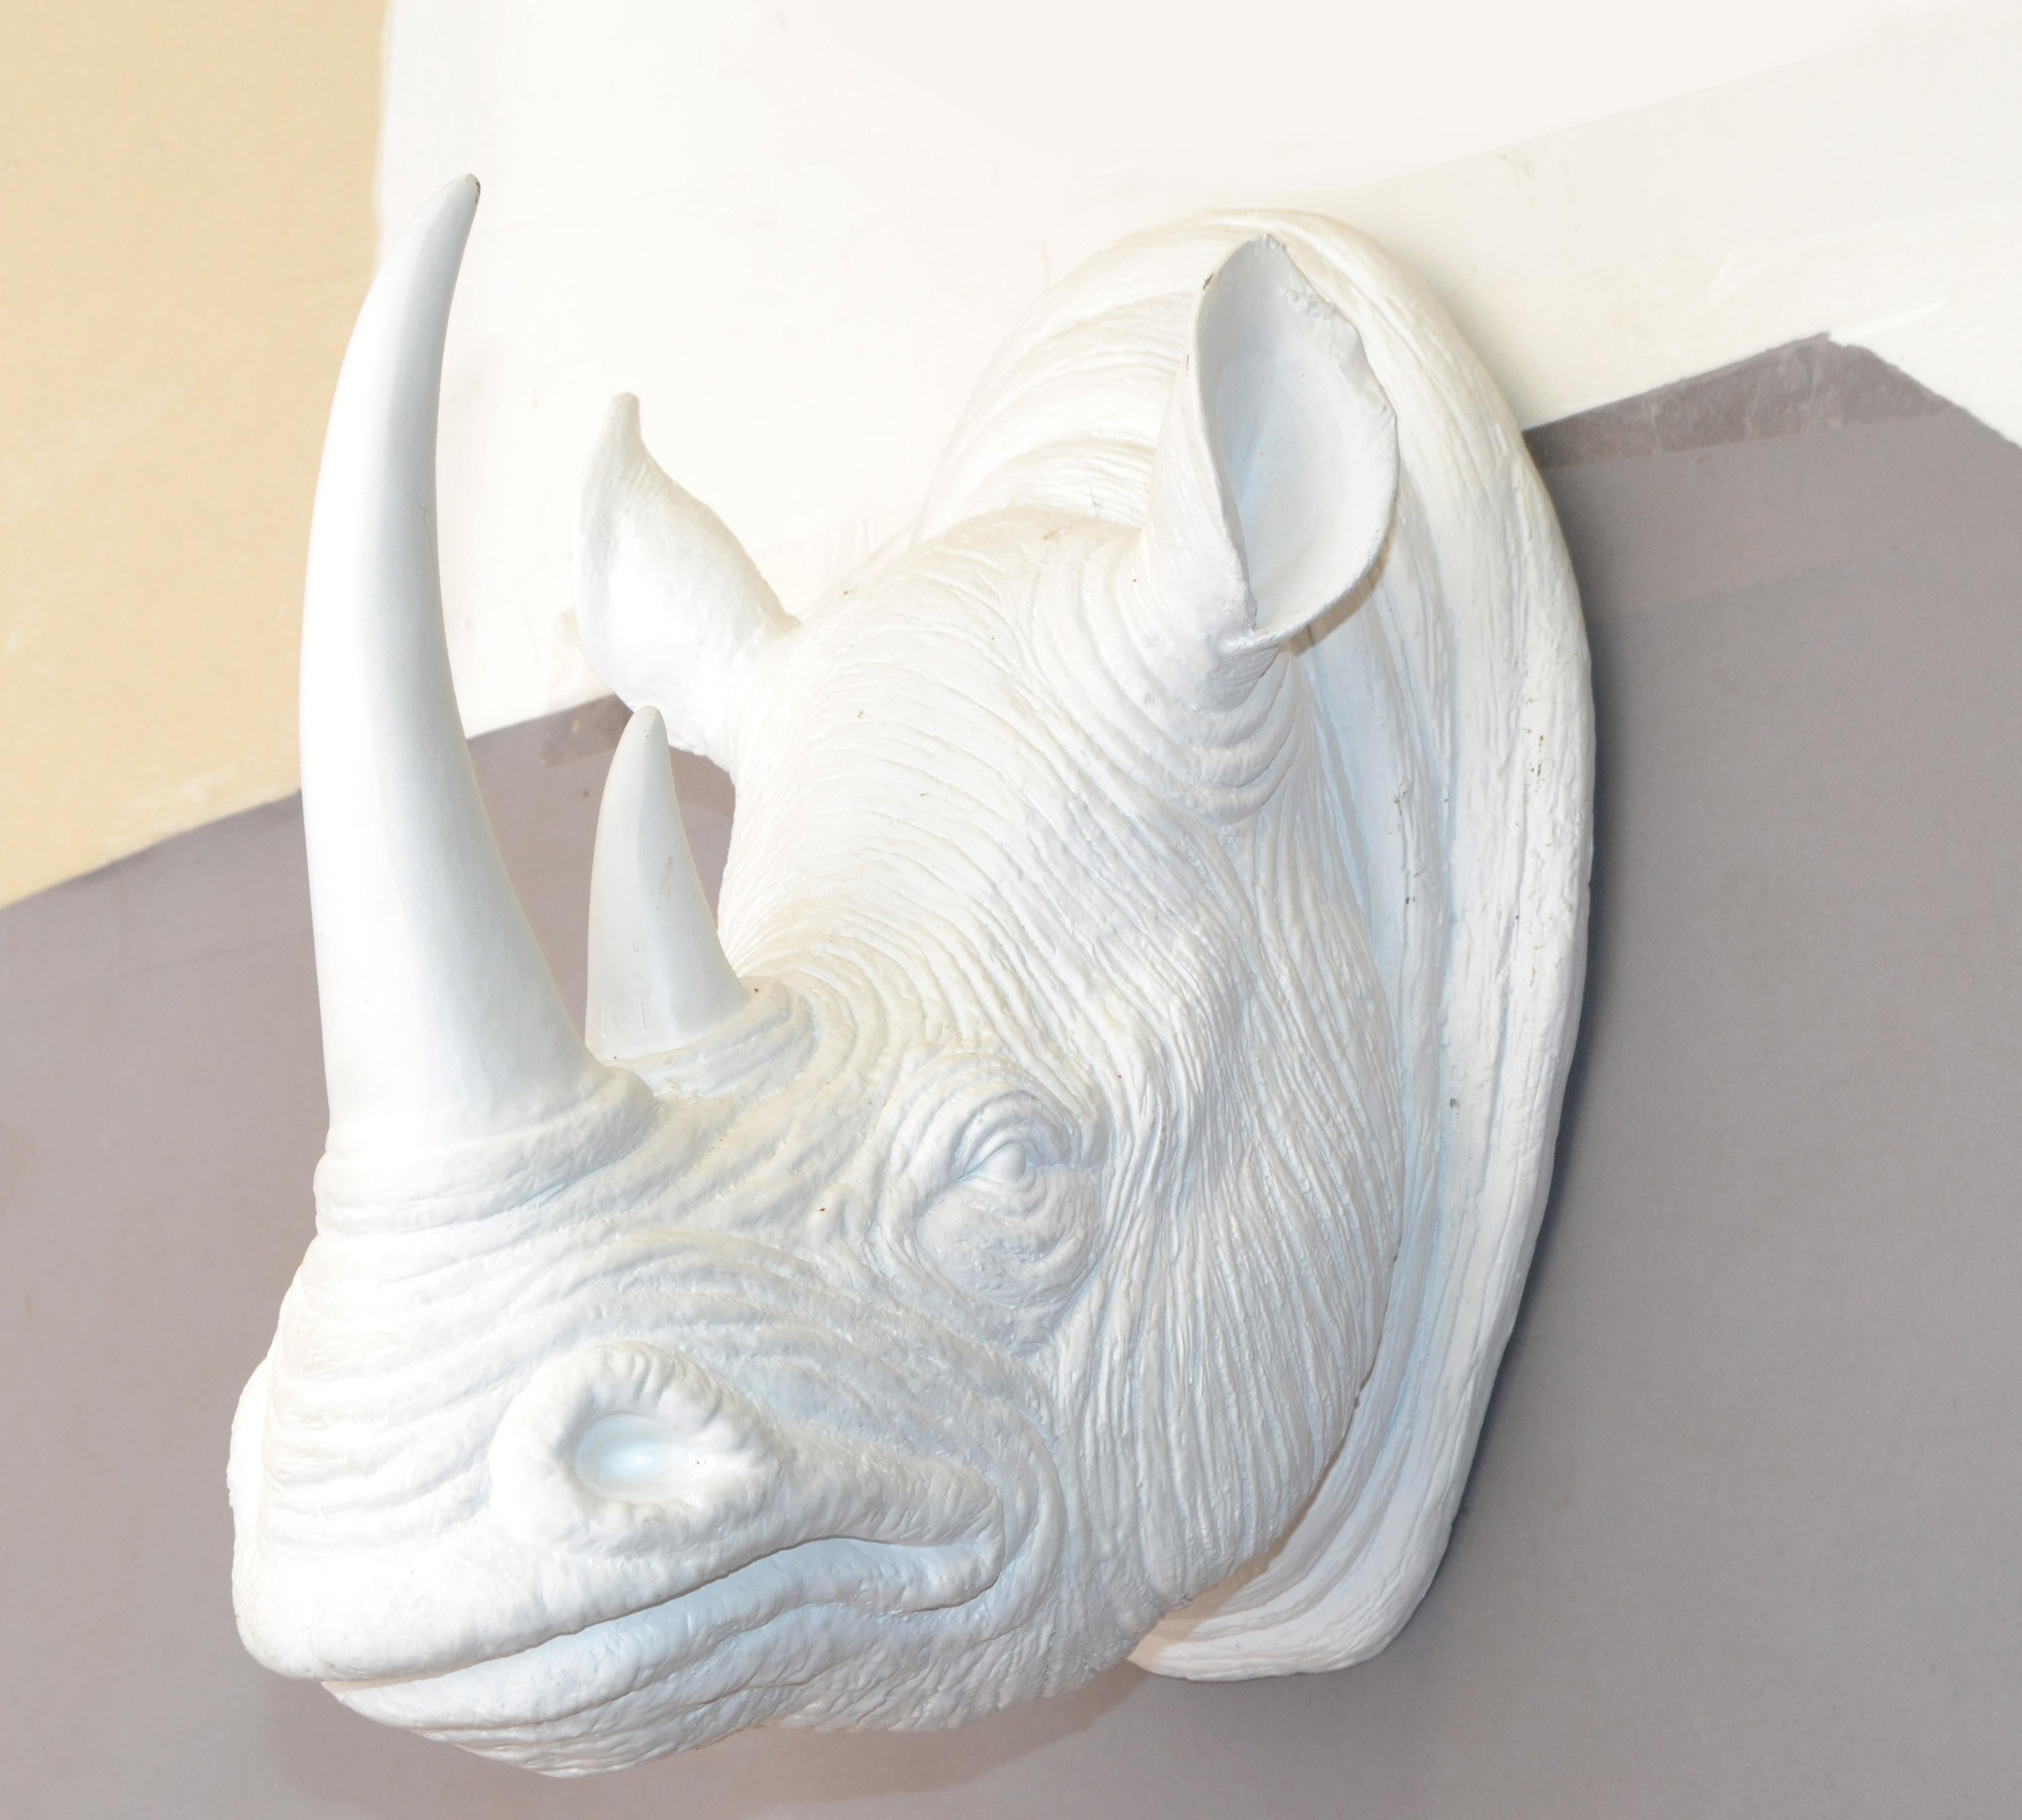 This is a faux taxidermy rhino head, fake trophy head, wall mounted animal sculpture made out of Resin and painted in an off-white enamel finish.
Note the real wrinkles of the Skin and the detail at the rhino ears and nose.
Secure hanging